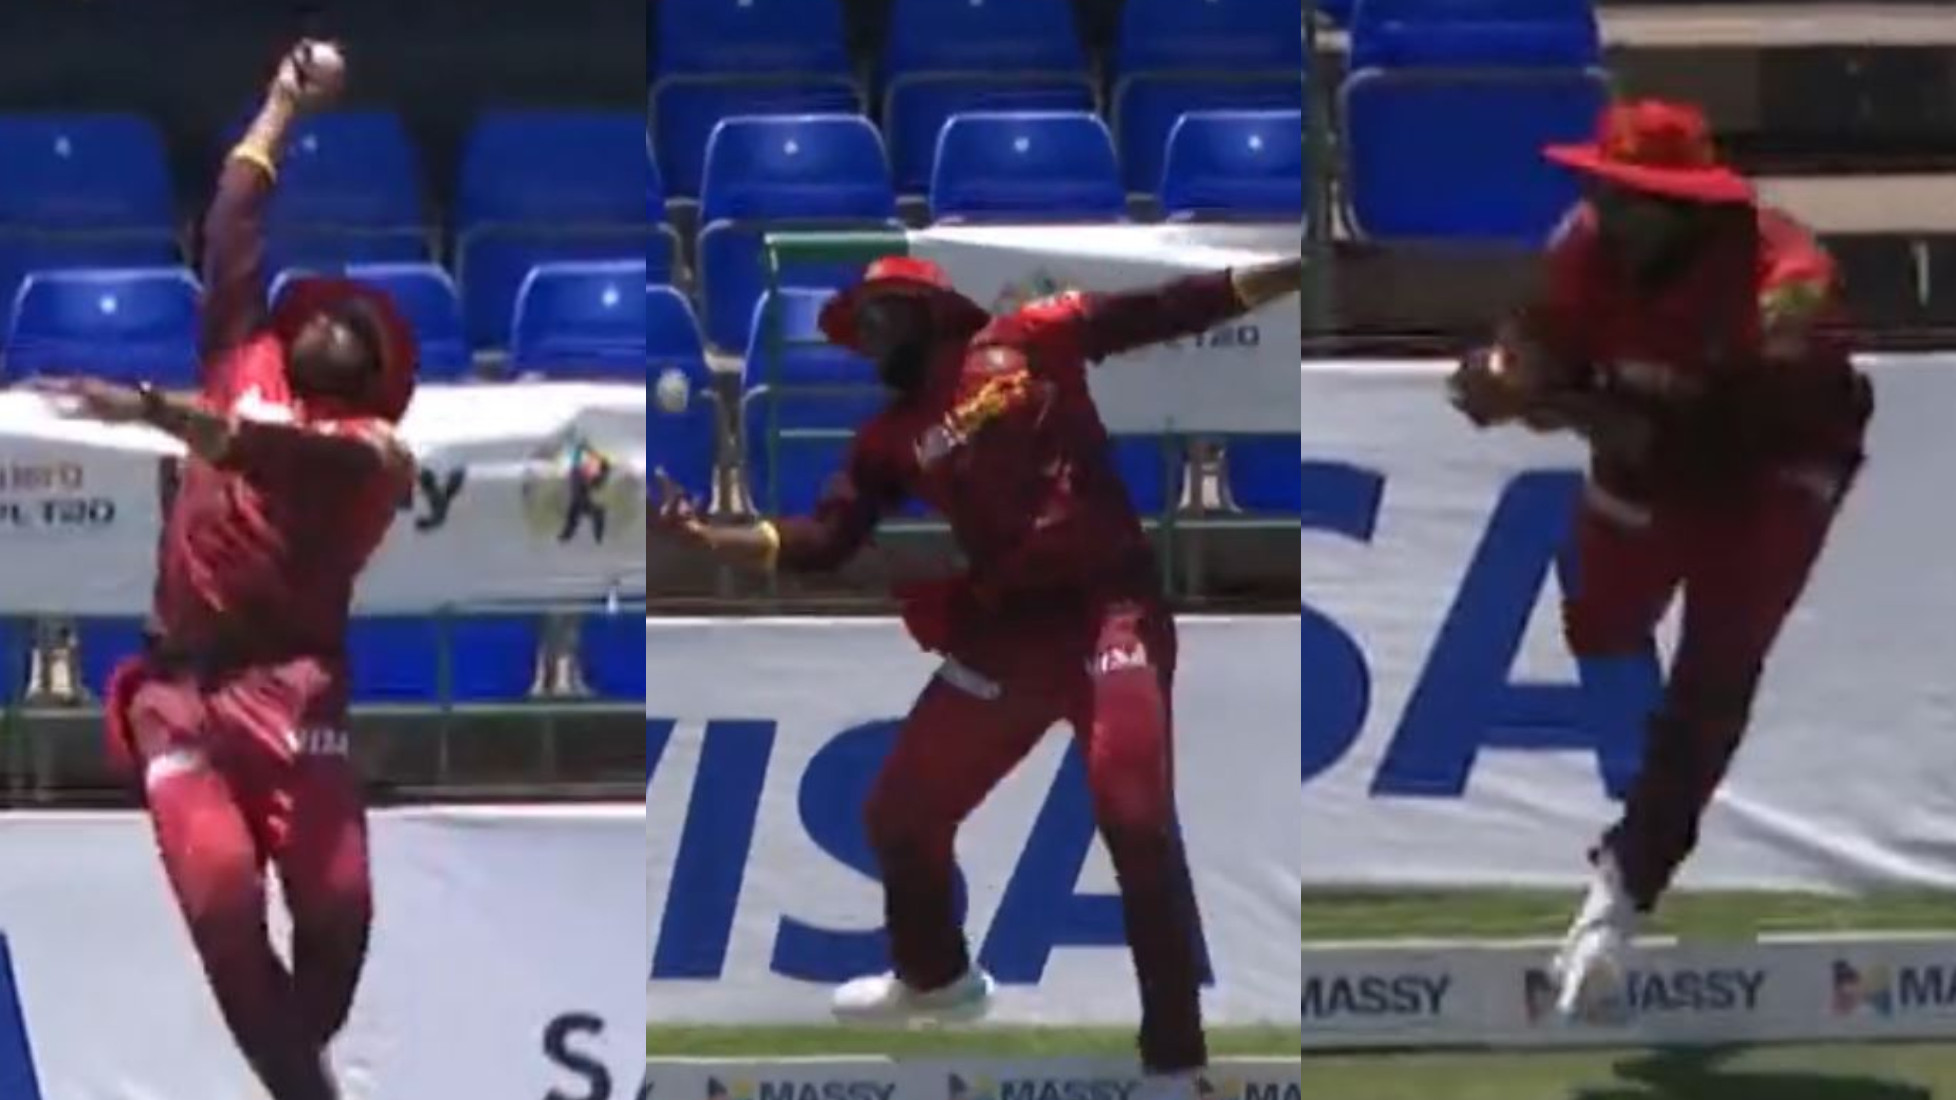 CPL 2022: WATCH- Kieron Pollard takes a breathtaking leaping catch at boundary; leaves everyone in awe